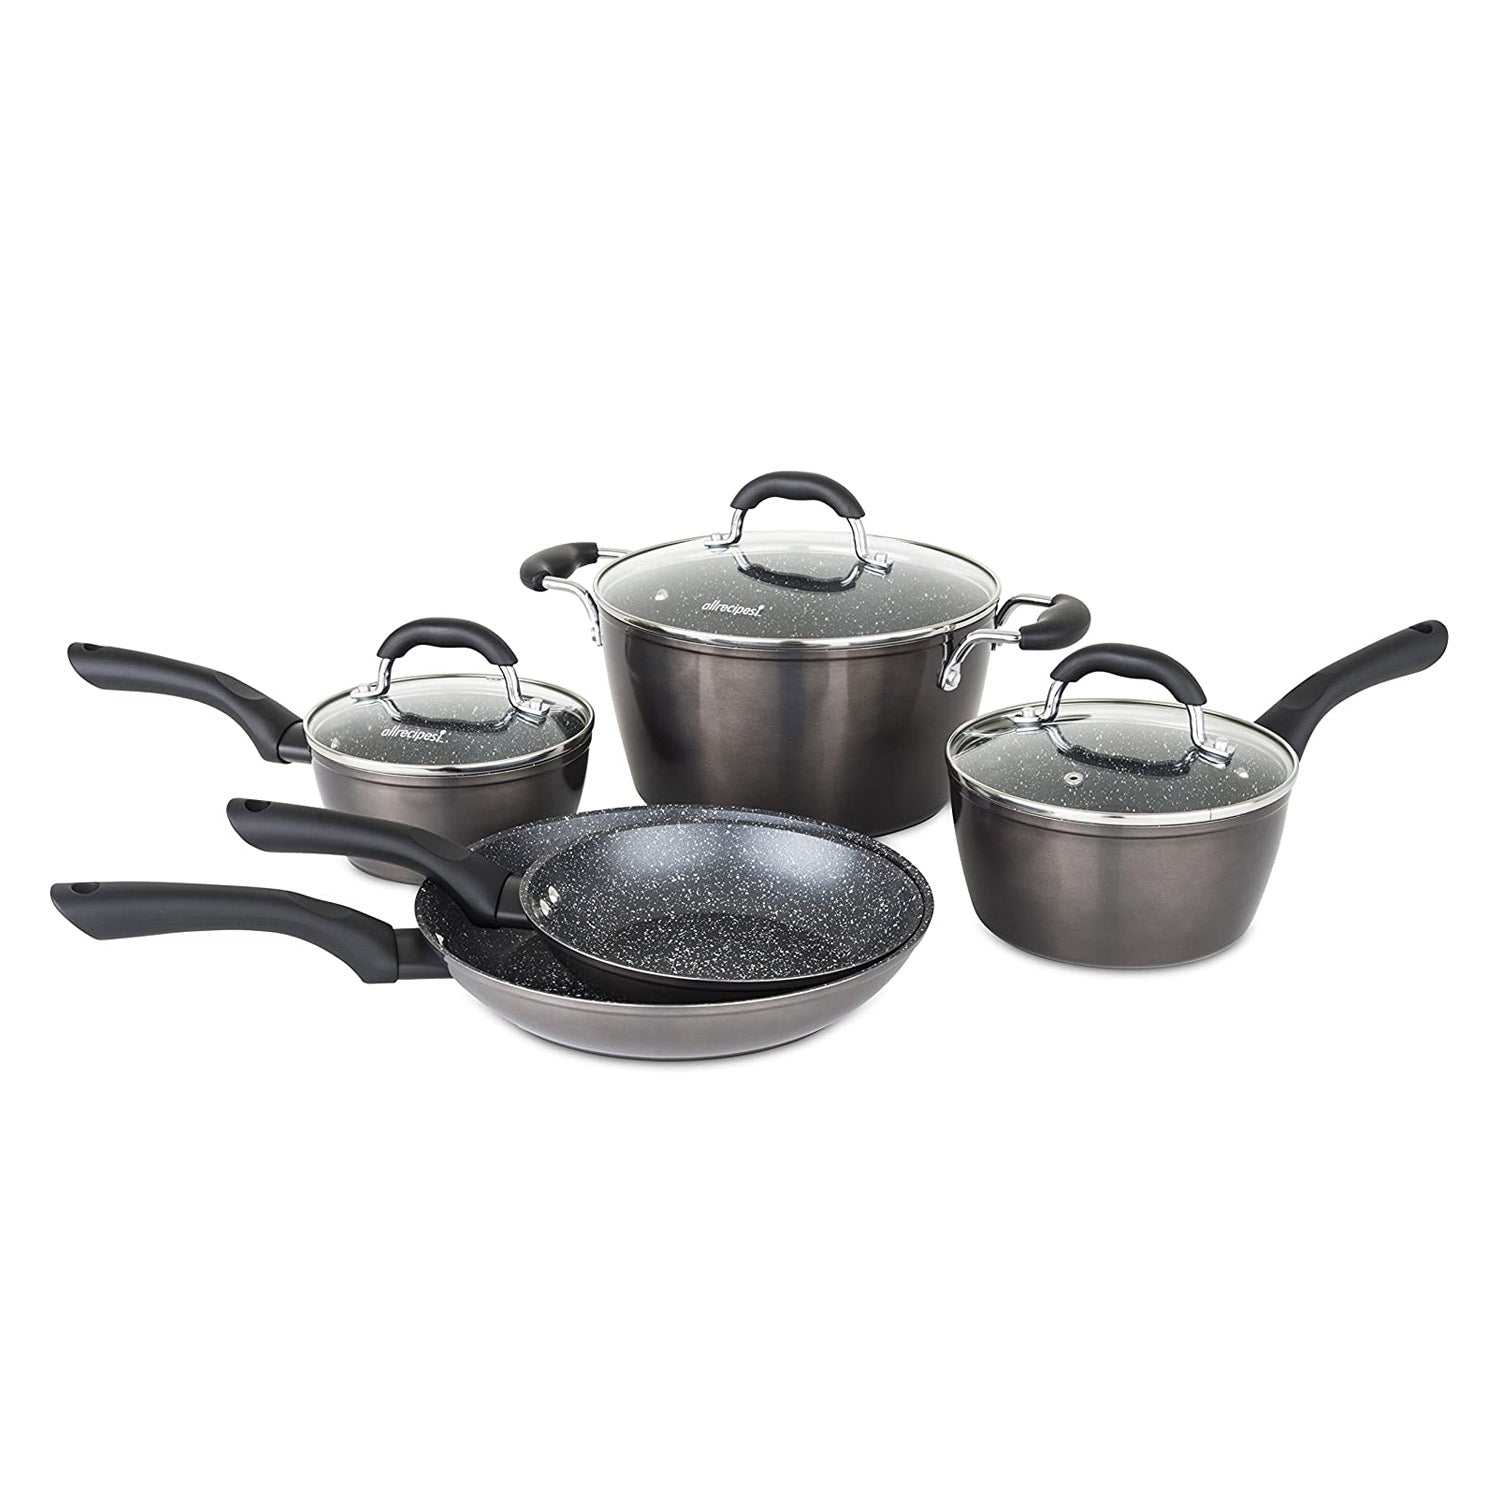 8 Pieces Cookware Set Granite Nonstick Pots and Pans with